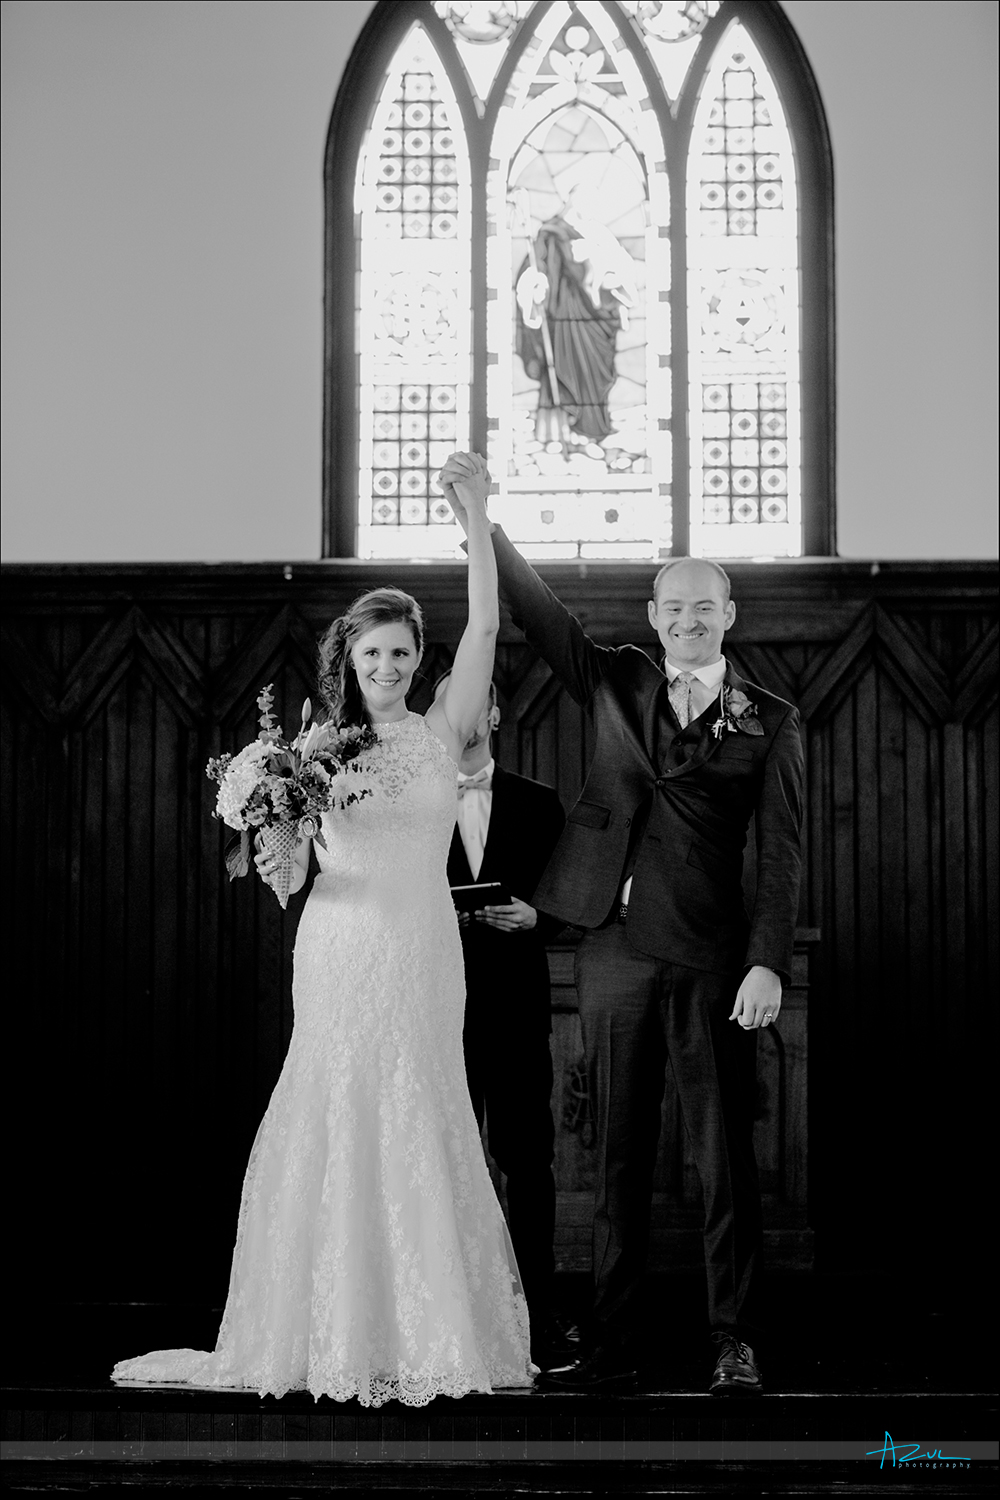 The bride and groom raise their arms in victory after the wedding as the photographer captured this perfectly in Raleigh NC